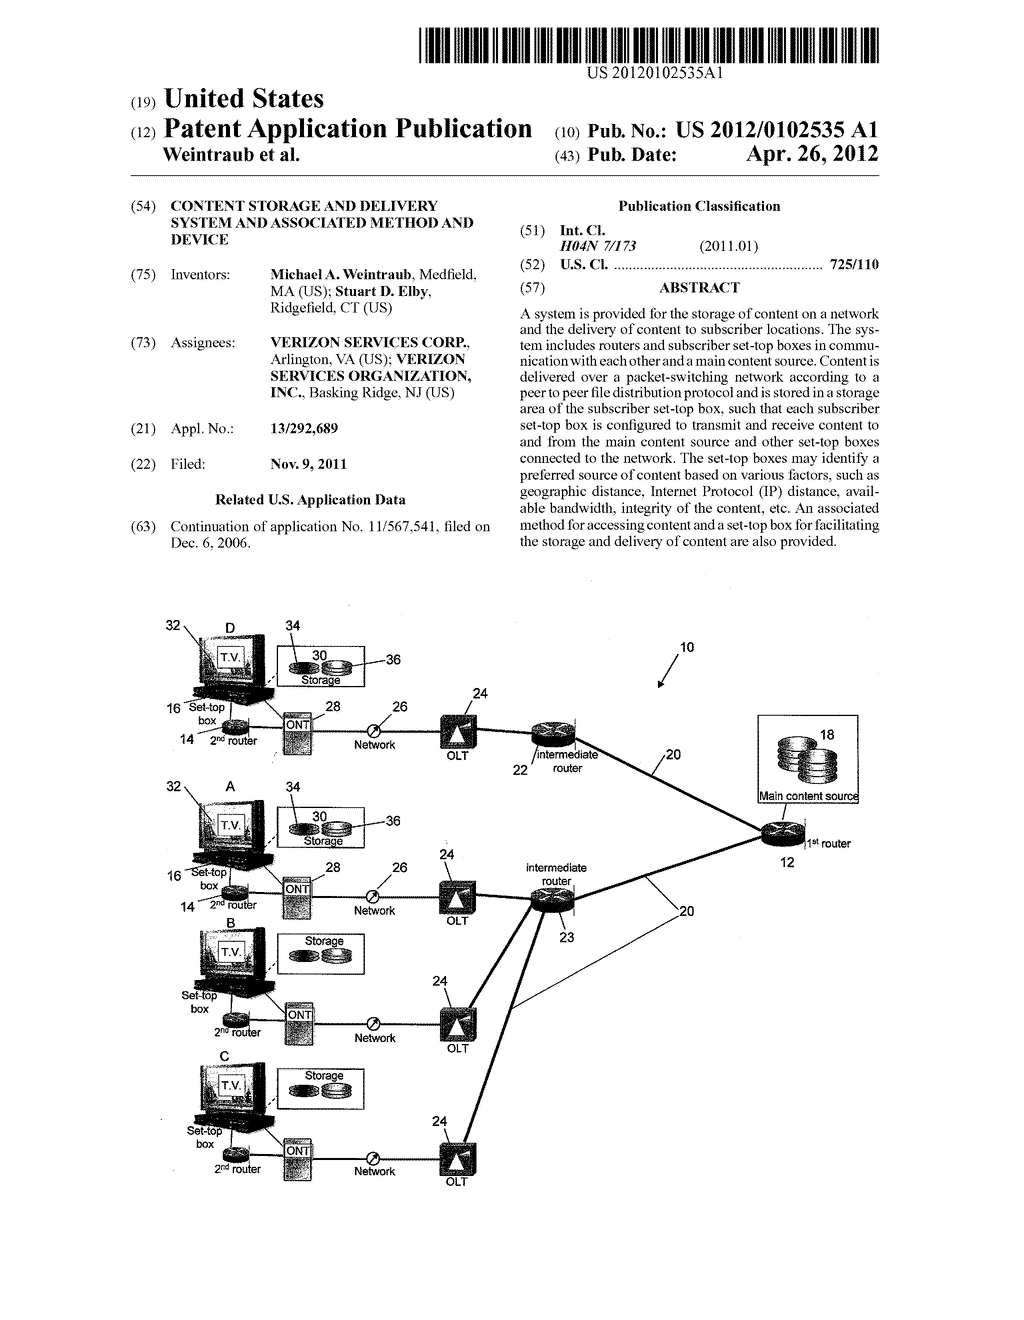 CONTENT STORAGE AND DELIVERY SYSTEM AND ASSOCIATED METHOD AND DEVICE - diagram, schematic, and image 01